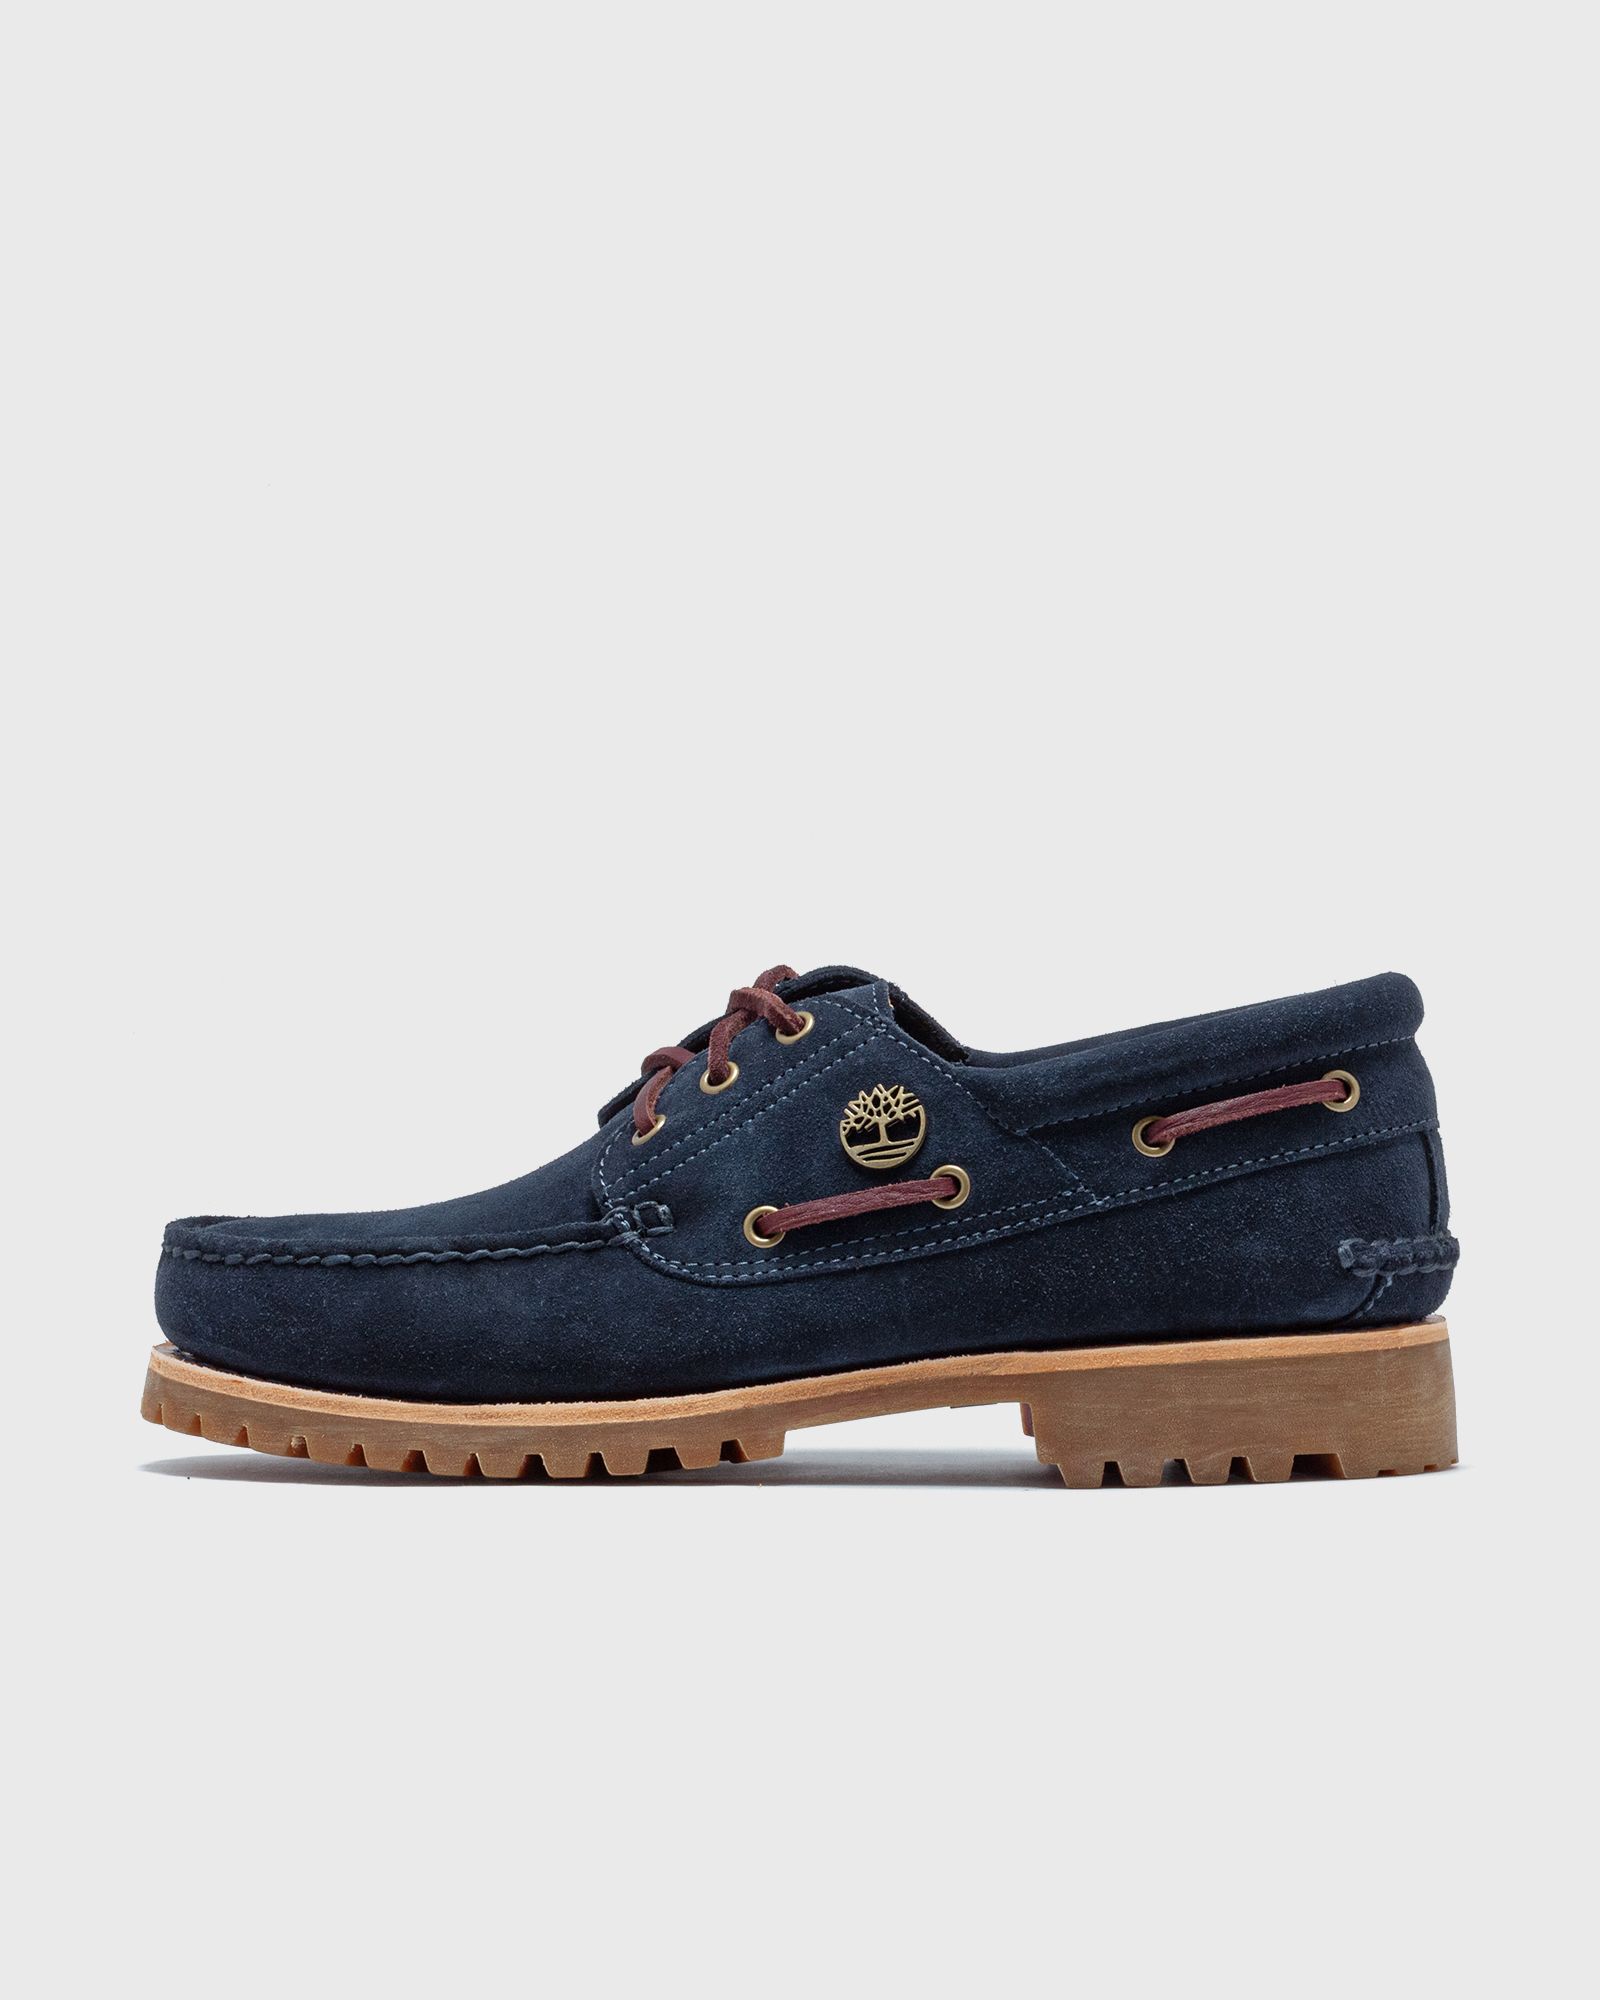 Timberland - authentic boat shoe men casual shoes blue in größe:41,5